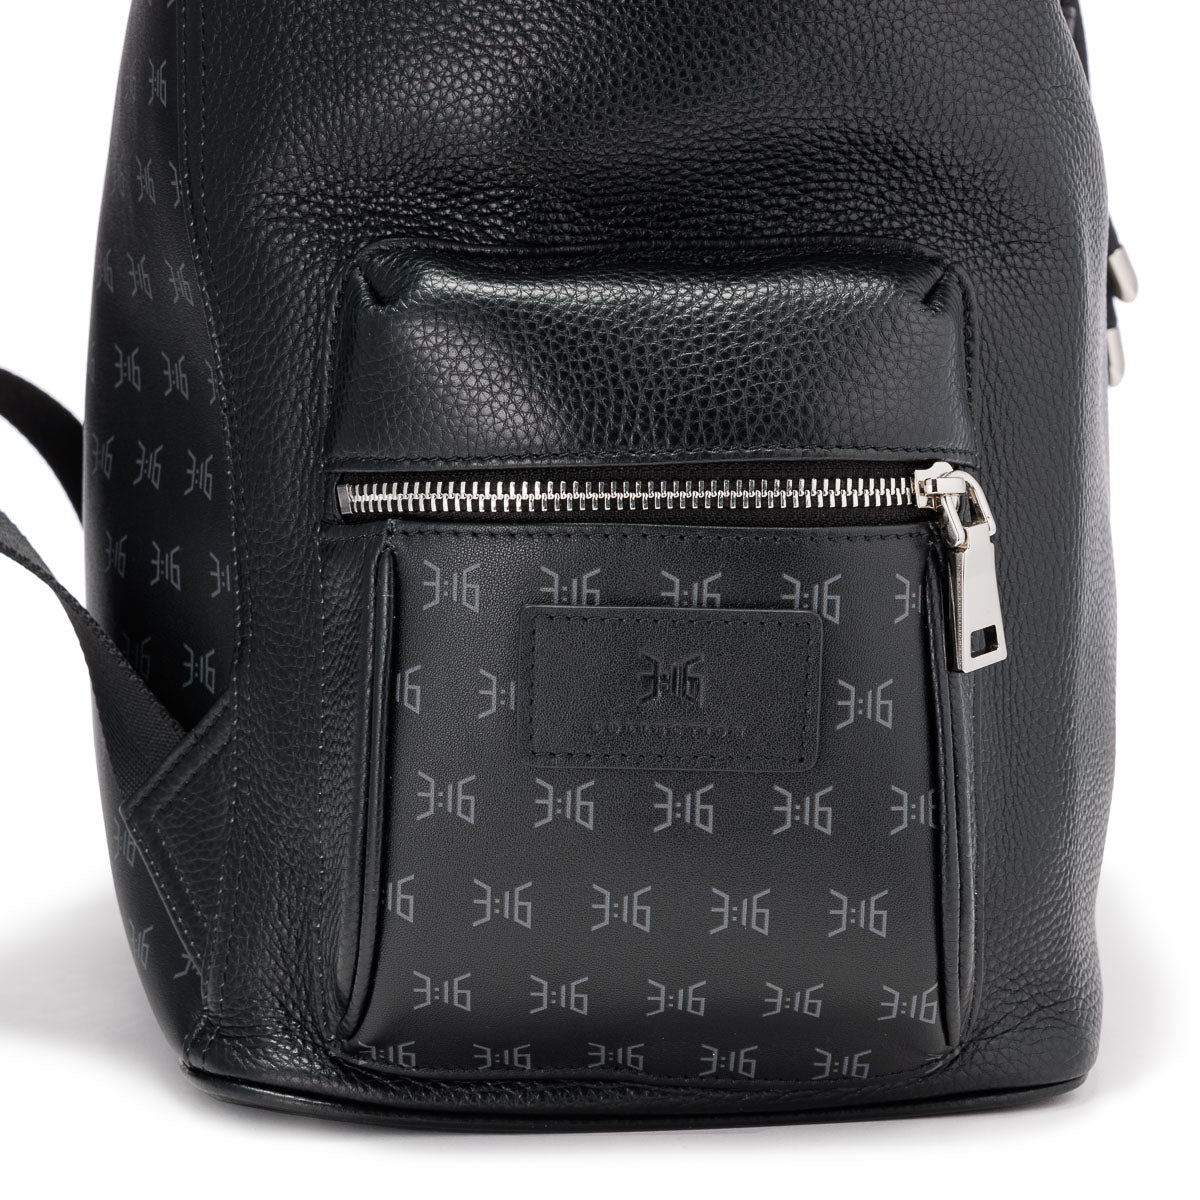 3:16 Collection - Luxury Top Grain Leather Backpack